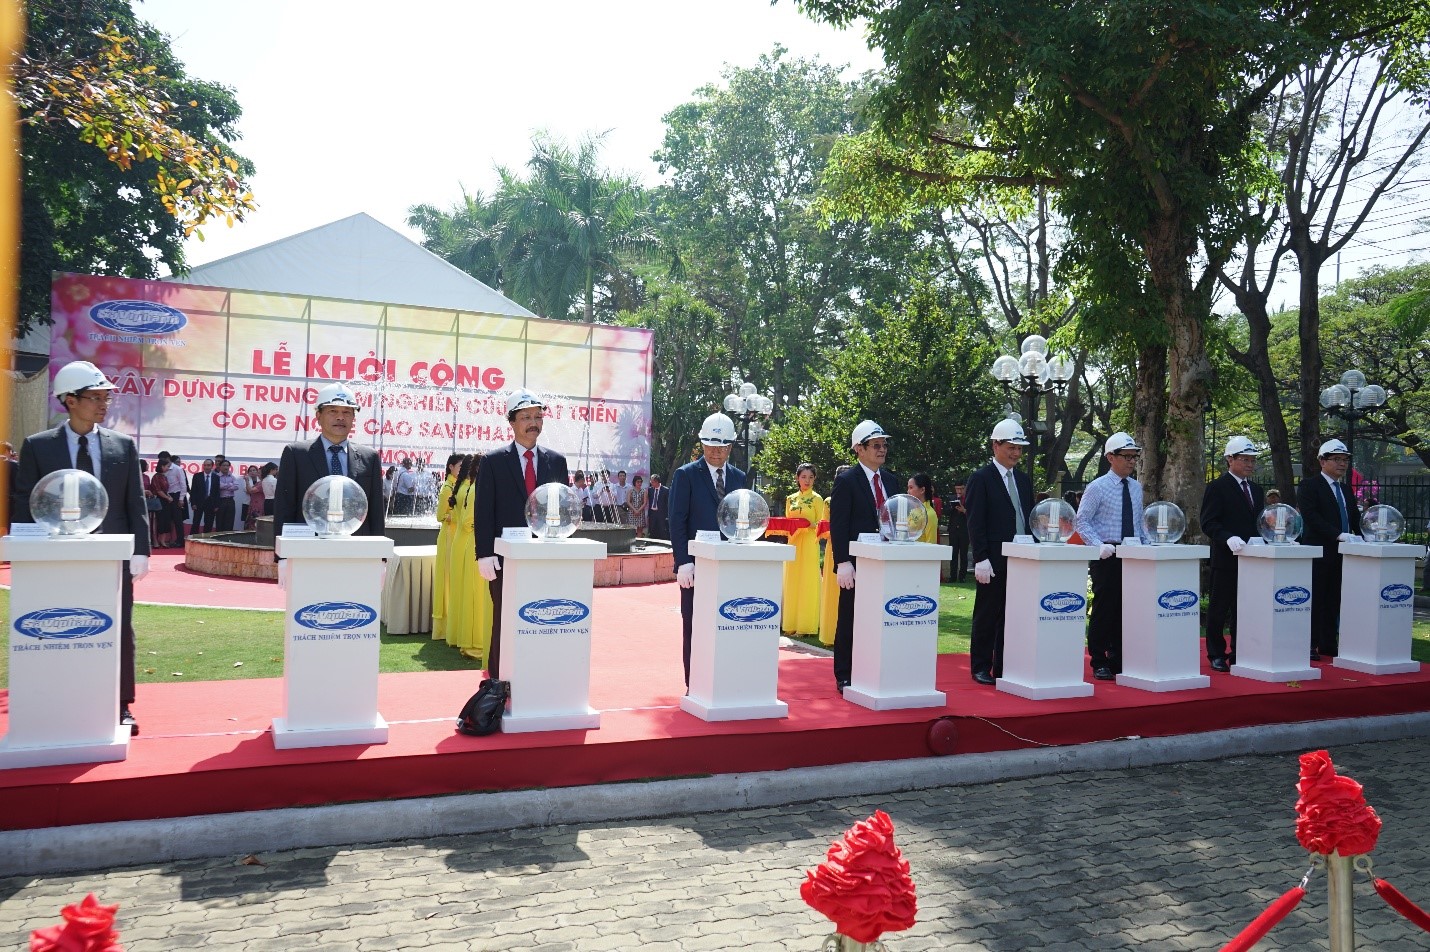 Officials and SaVipharm leaders take part inn a groundbreaking ritual for the firm's new high-tech research and development center in Ho Chi Minh City on January 7, 2020. Photo: SaVipharm